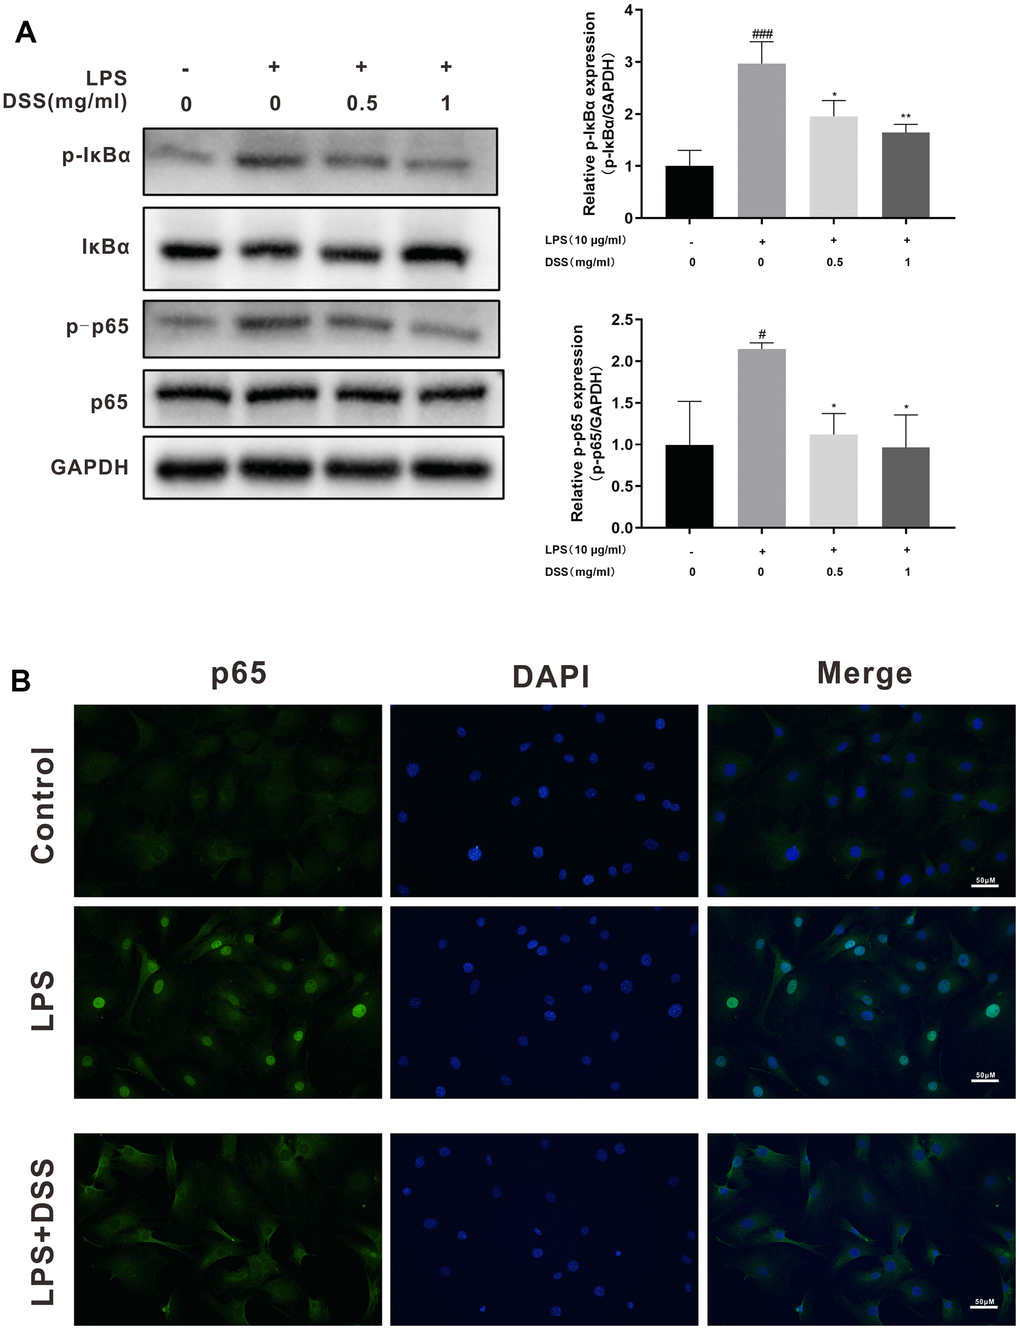 DSS inhibited LPS mediated activation of the NF-κB pathway. The chondrocytes were pretreated with DSS for 24 h and stimulated with or without LPS for 2 h. (A) The protein levels of p-IκBα, IκBα, p-p65 and p65 were assessed by western blot. (B) The nuclei translocation of p65 was analyzed by the immunofluorescence staining. #p ###p *p **p 